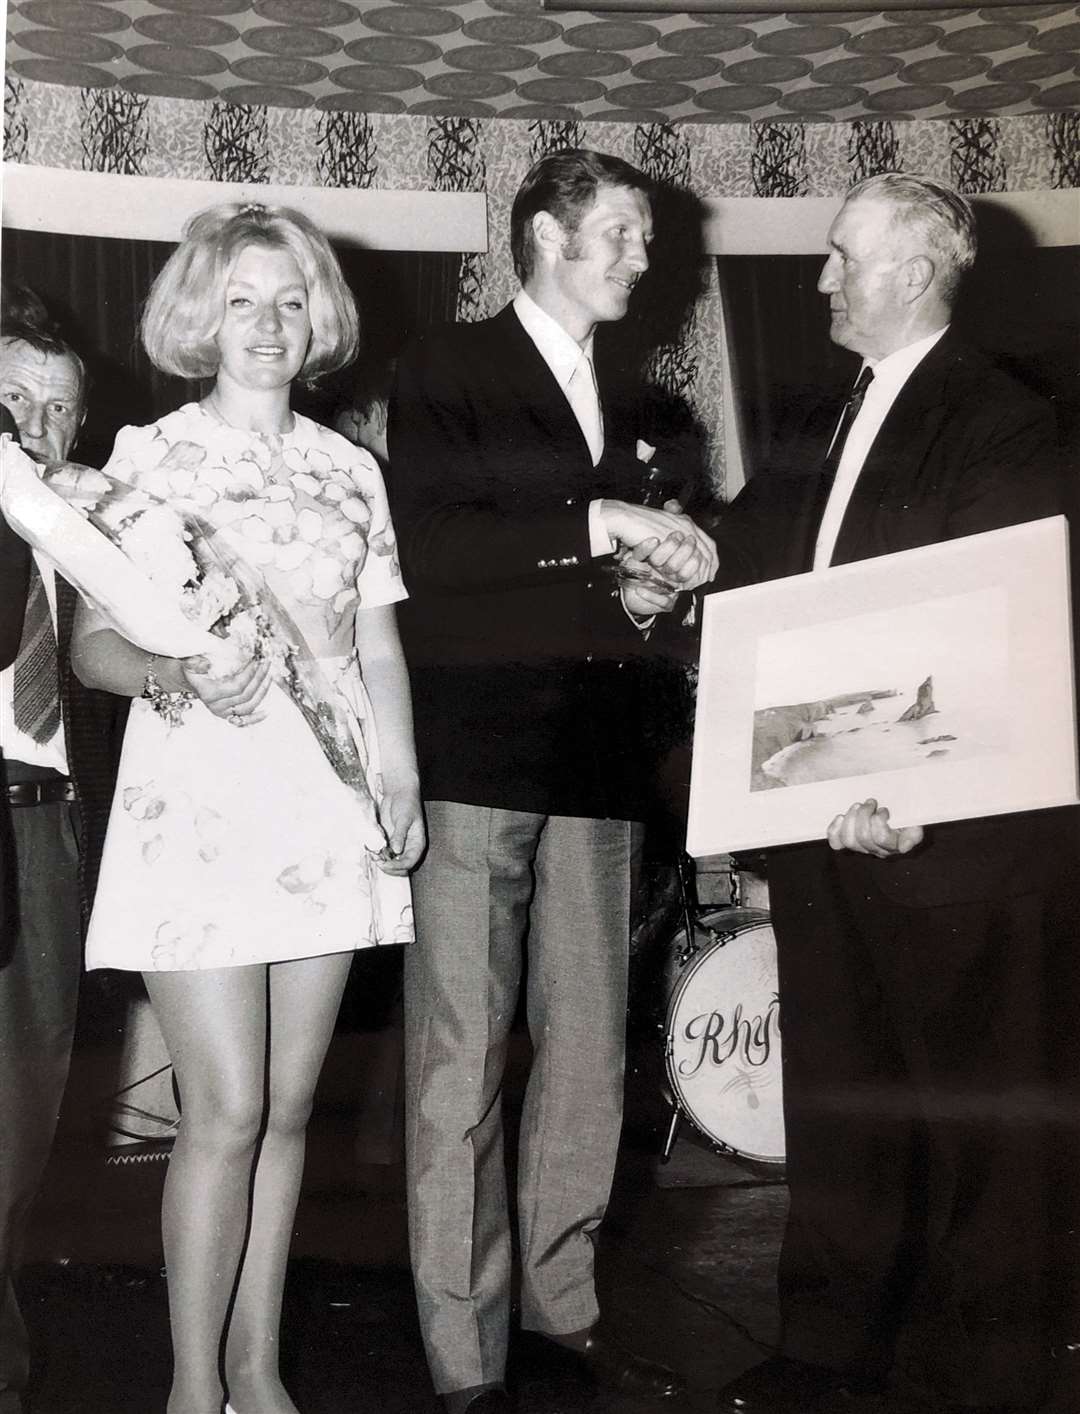 Billy McNeill and his wife Liz receive a framed painting from the president of the Caithness Celtic Supporters Club, Alec Manson, at the Station Hotel in Wick in July 1970. Picture: Caithness CSC